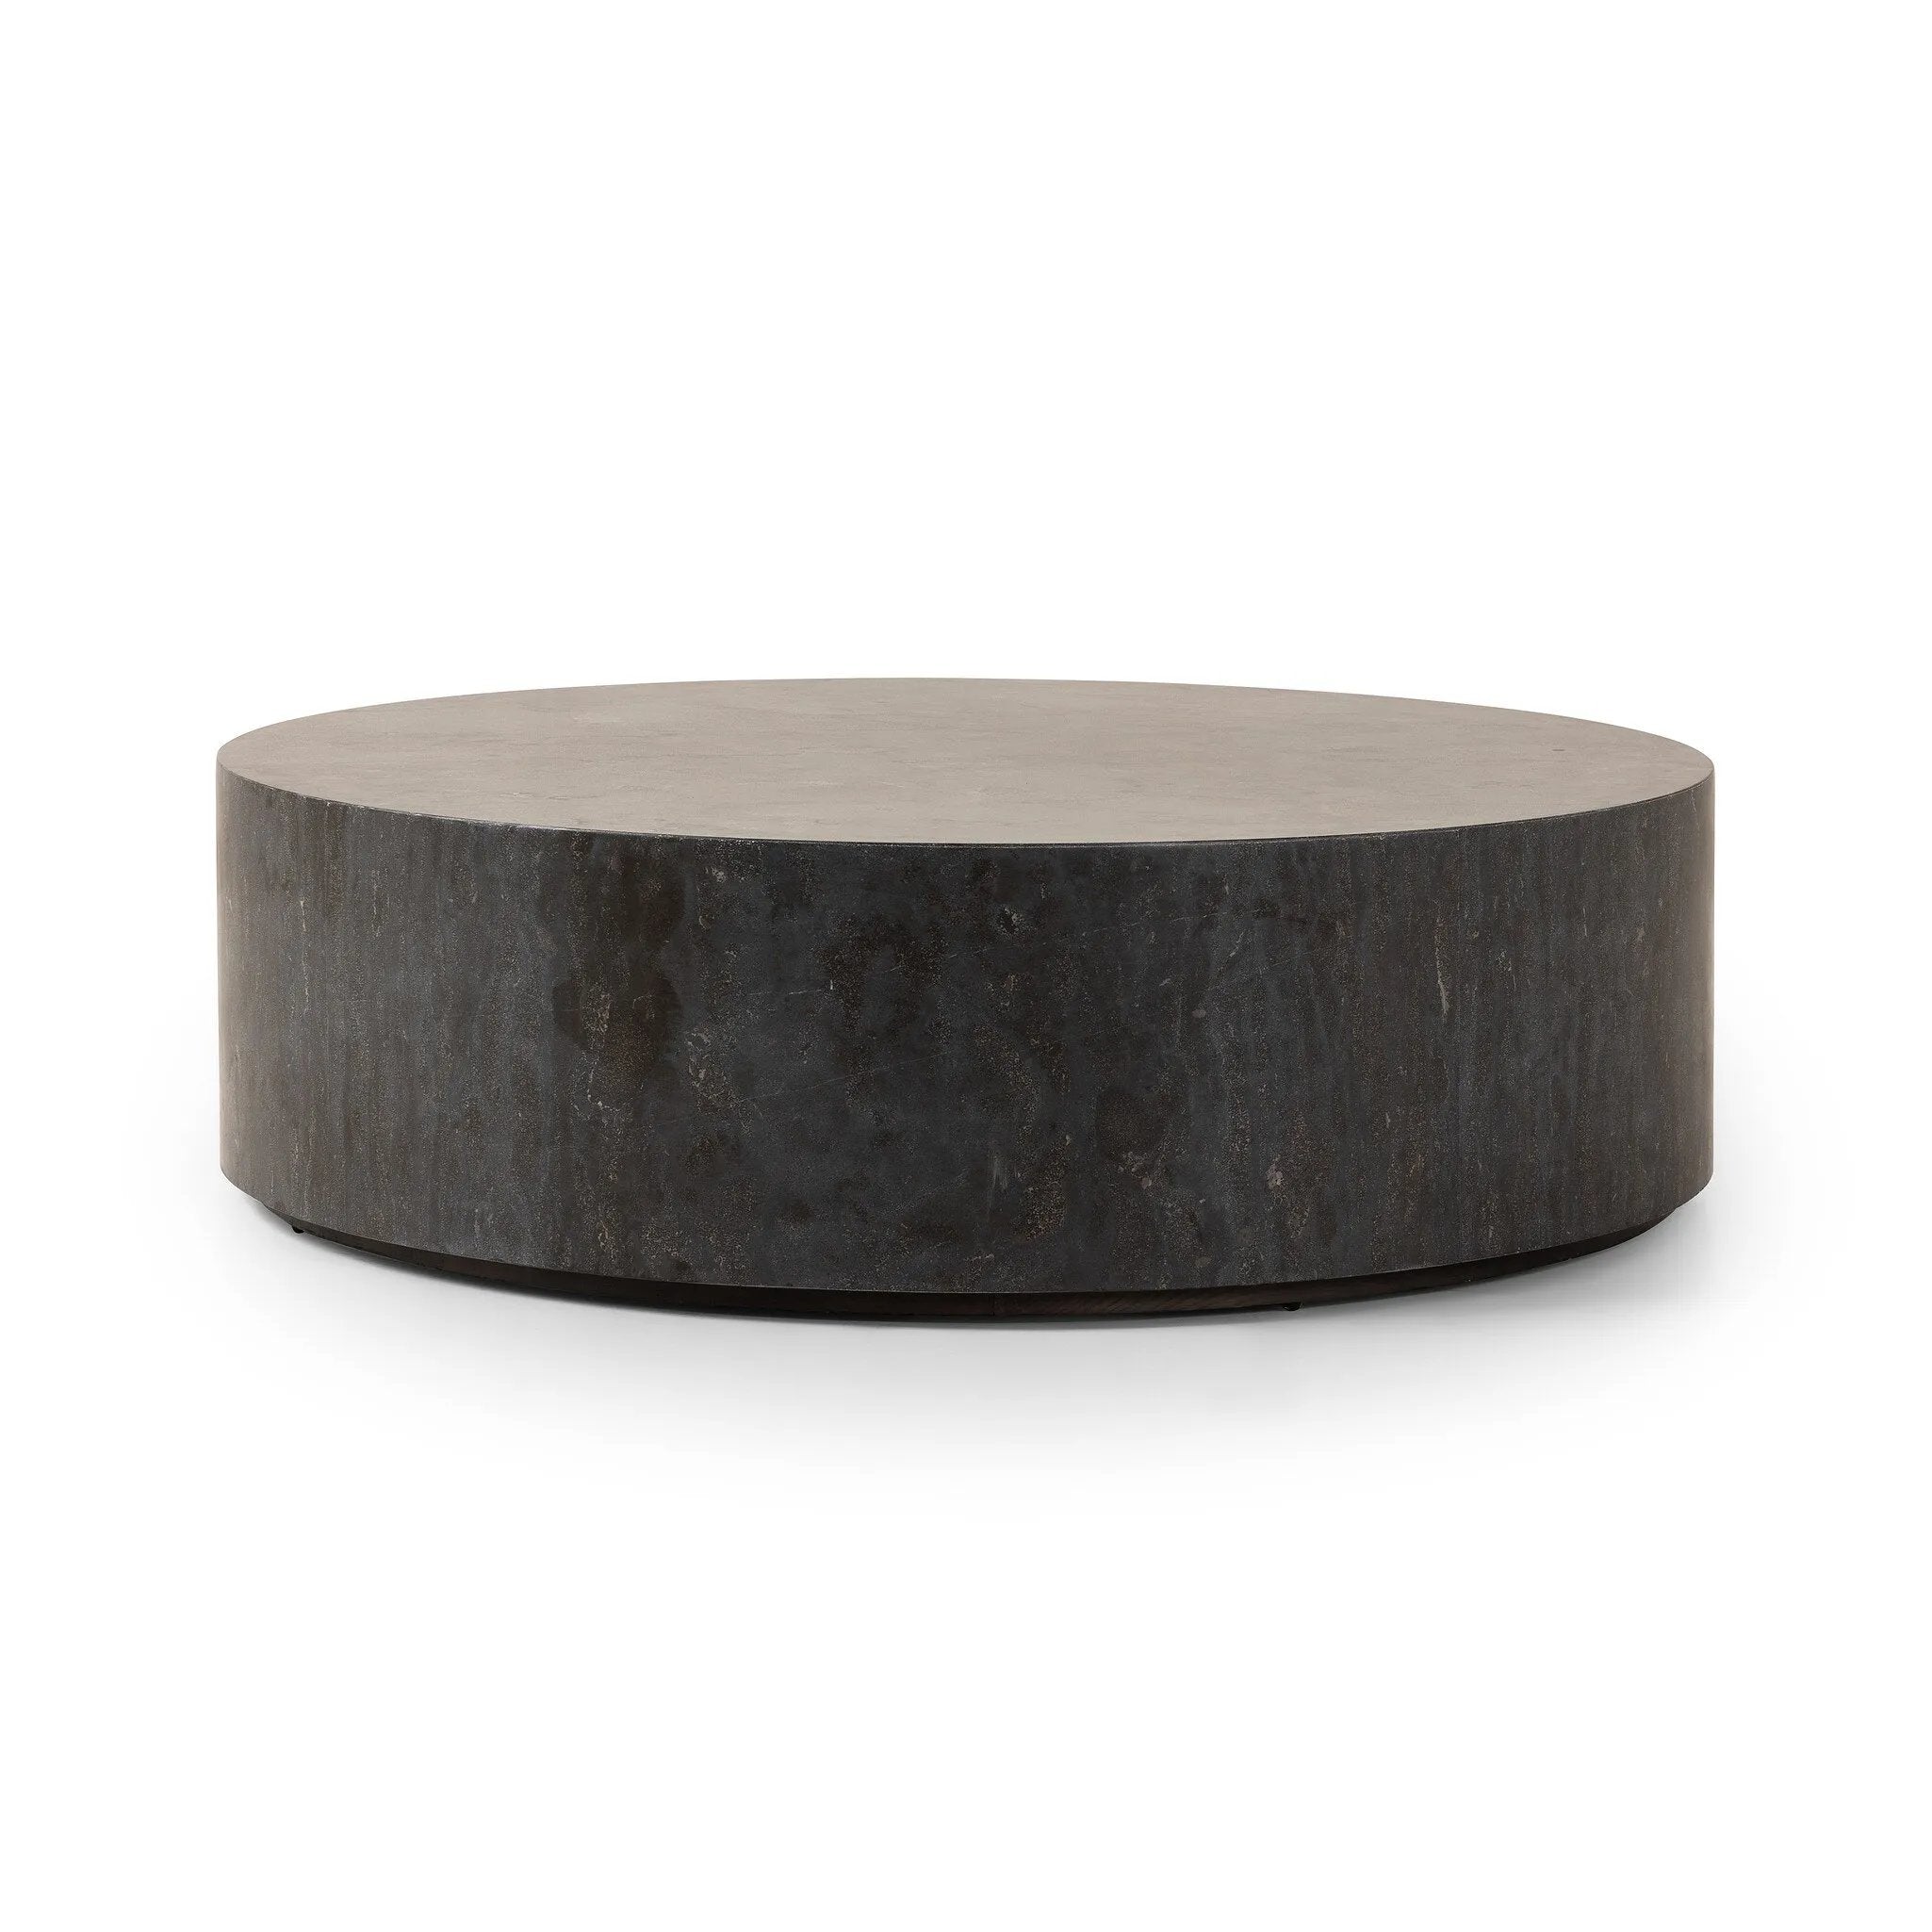 A cylinder-shaped coffee tables brings a shapely look to the living room. Made from natural polished bluestone for an organic look and feel.Collection: Hughe Amethyst Home provides interior design, new home construction design consulting, vintage area rugs, and lighting in the Miami metro area.